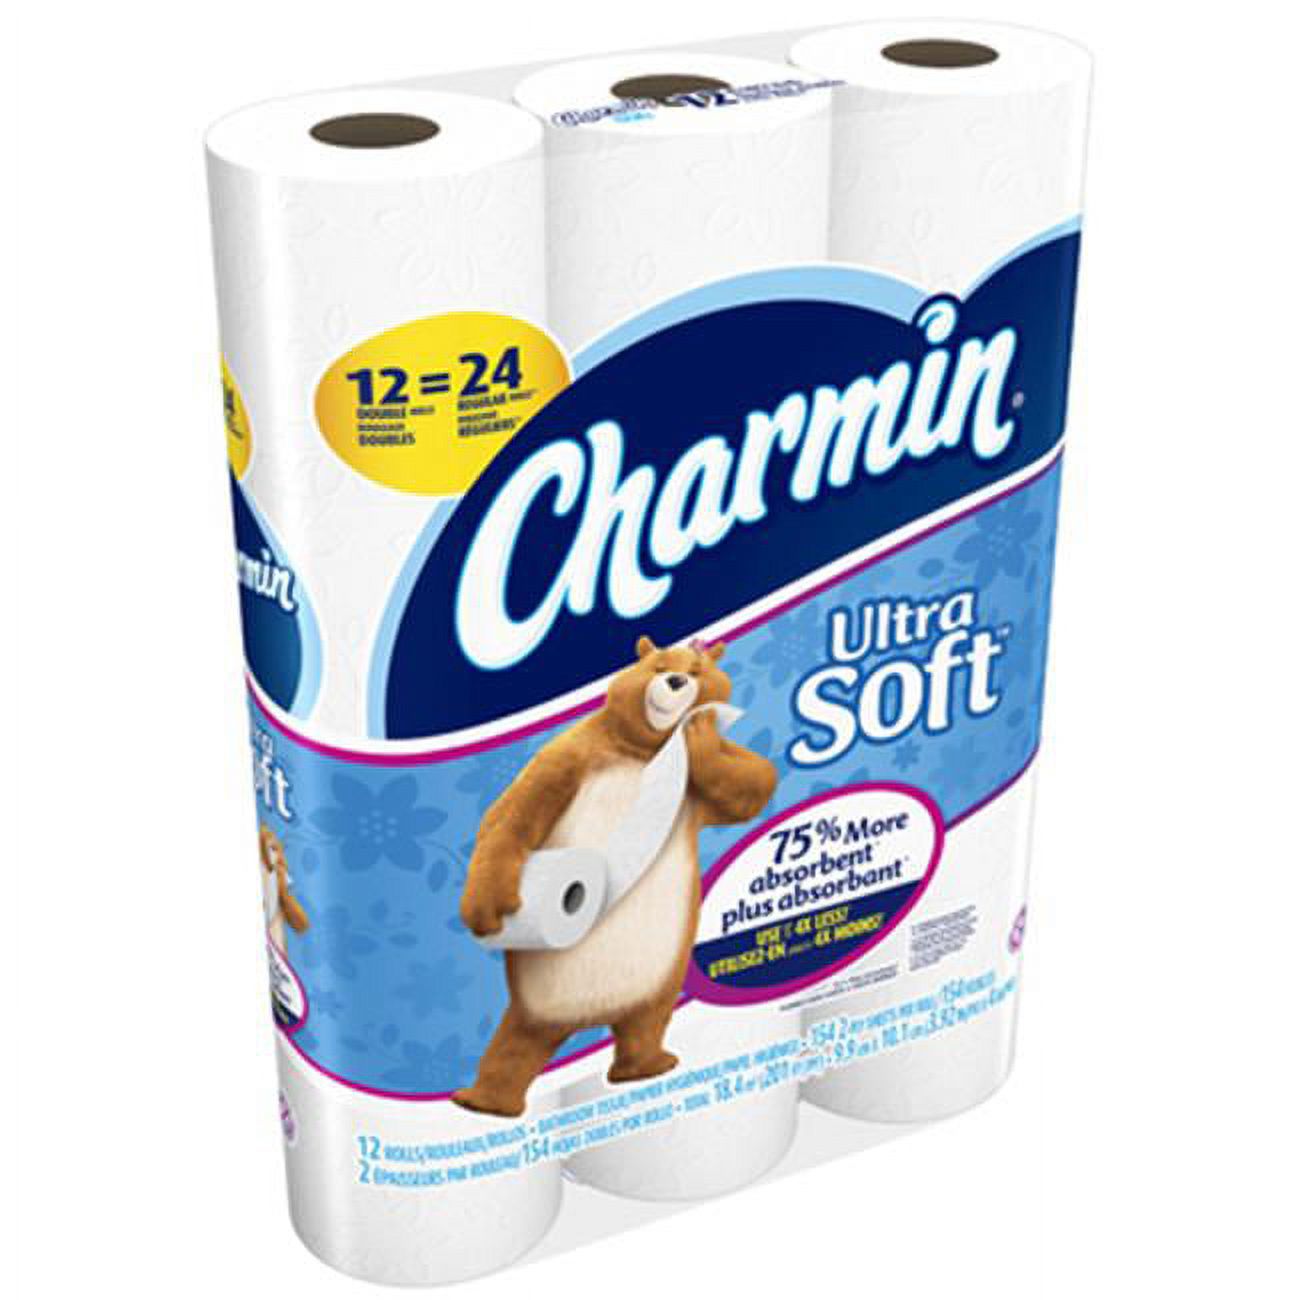 Charmin Ultra Soft Toilet Paper, 12 Double Rolls - image 1 of 4